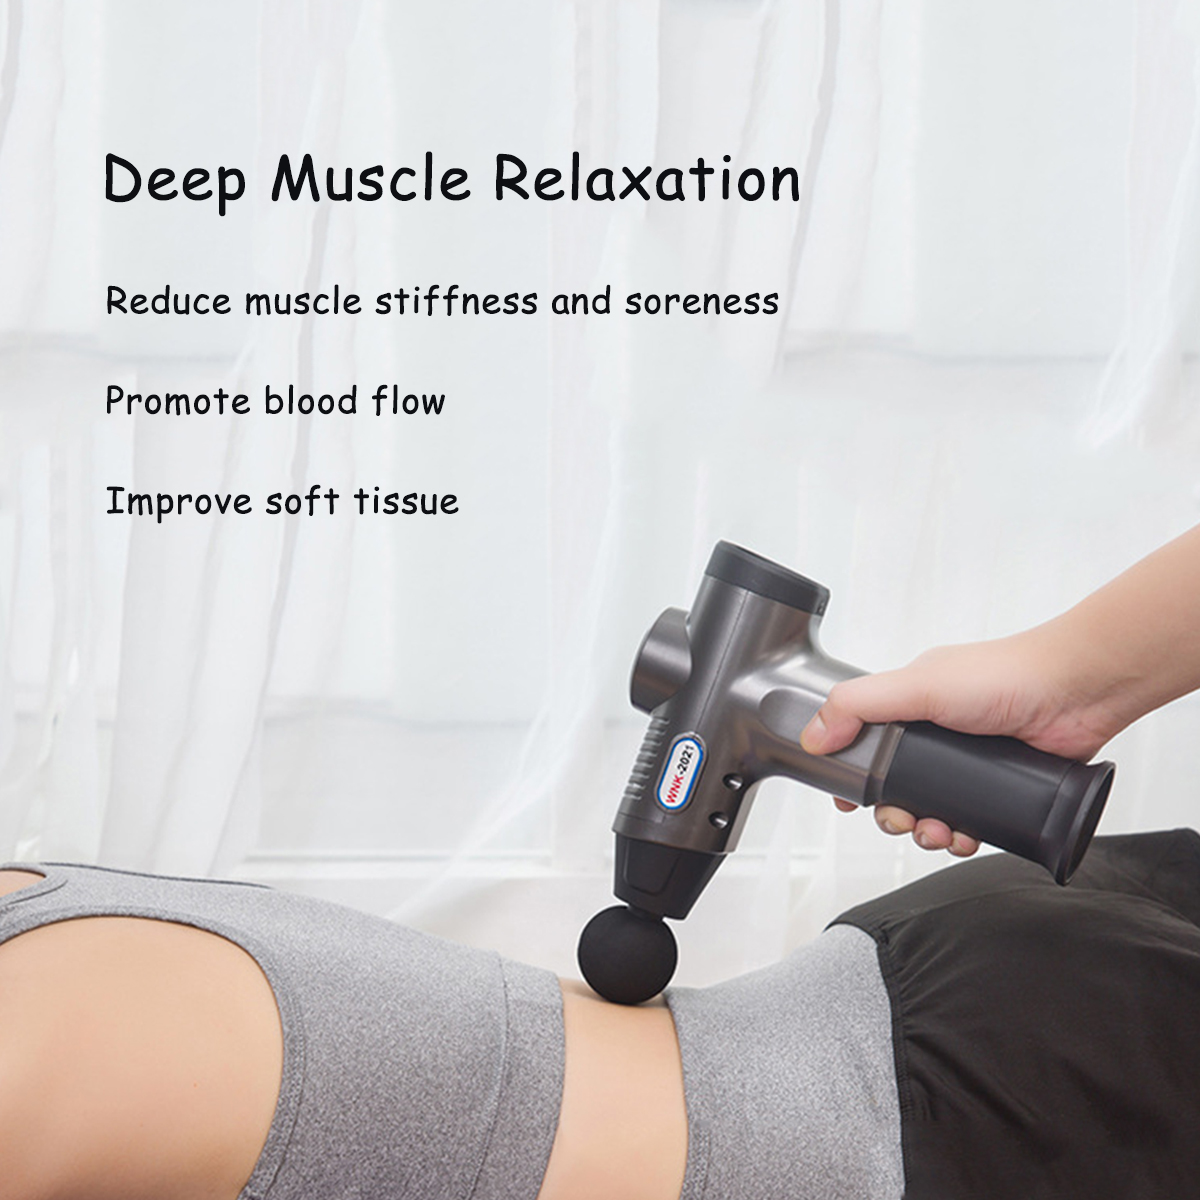 6-Heads-Muscle-Relief-MassagerTherapy-Vibration-Deep-Tissue-Electric-Massager-8-Levels-Percussion-Ma-1784434-7